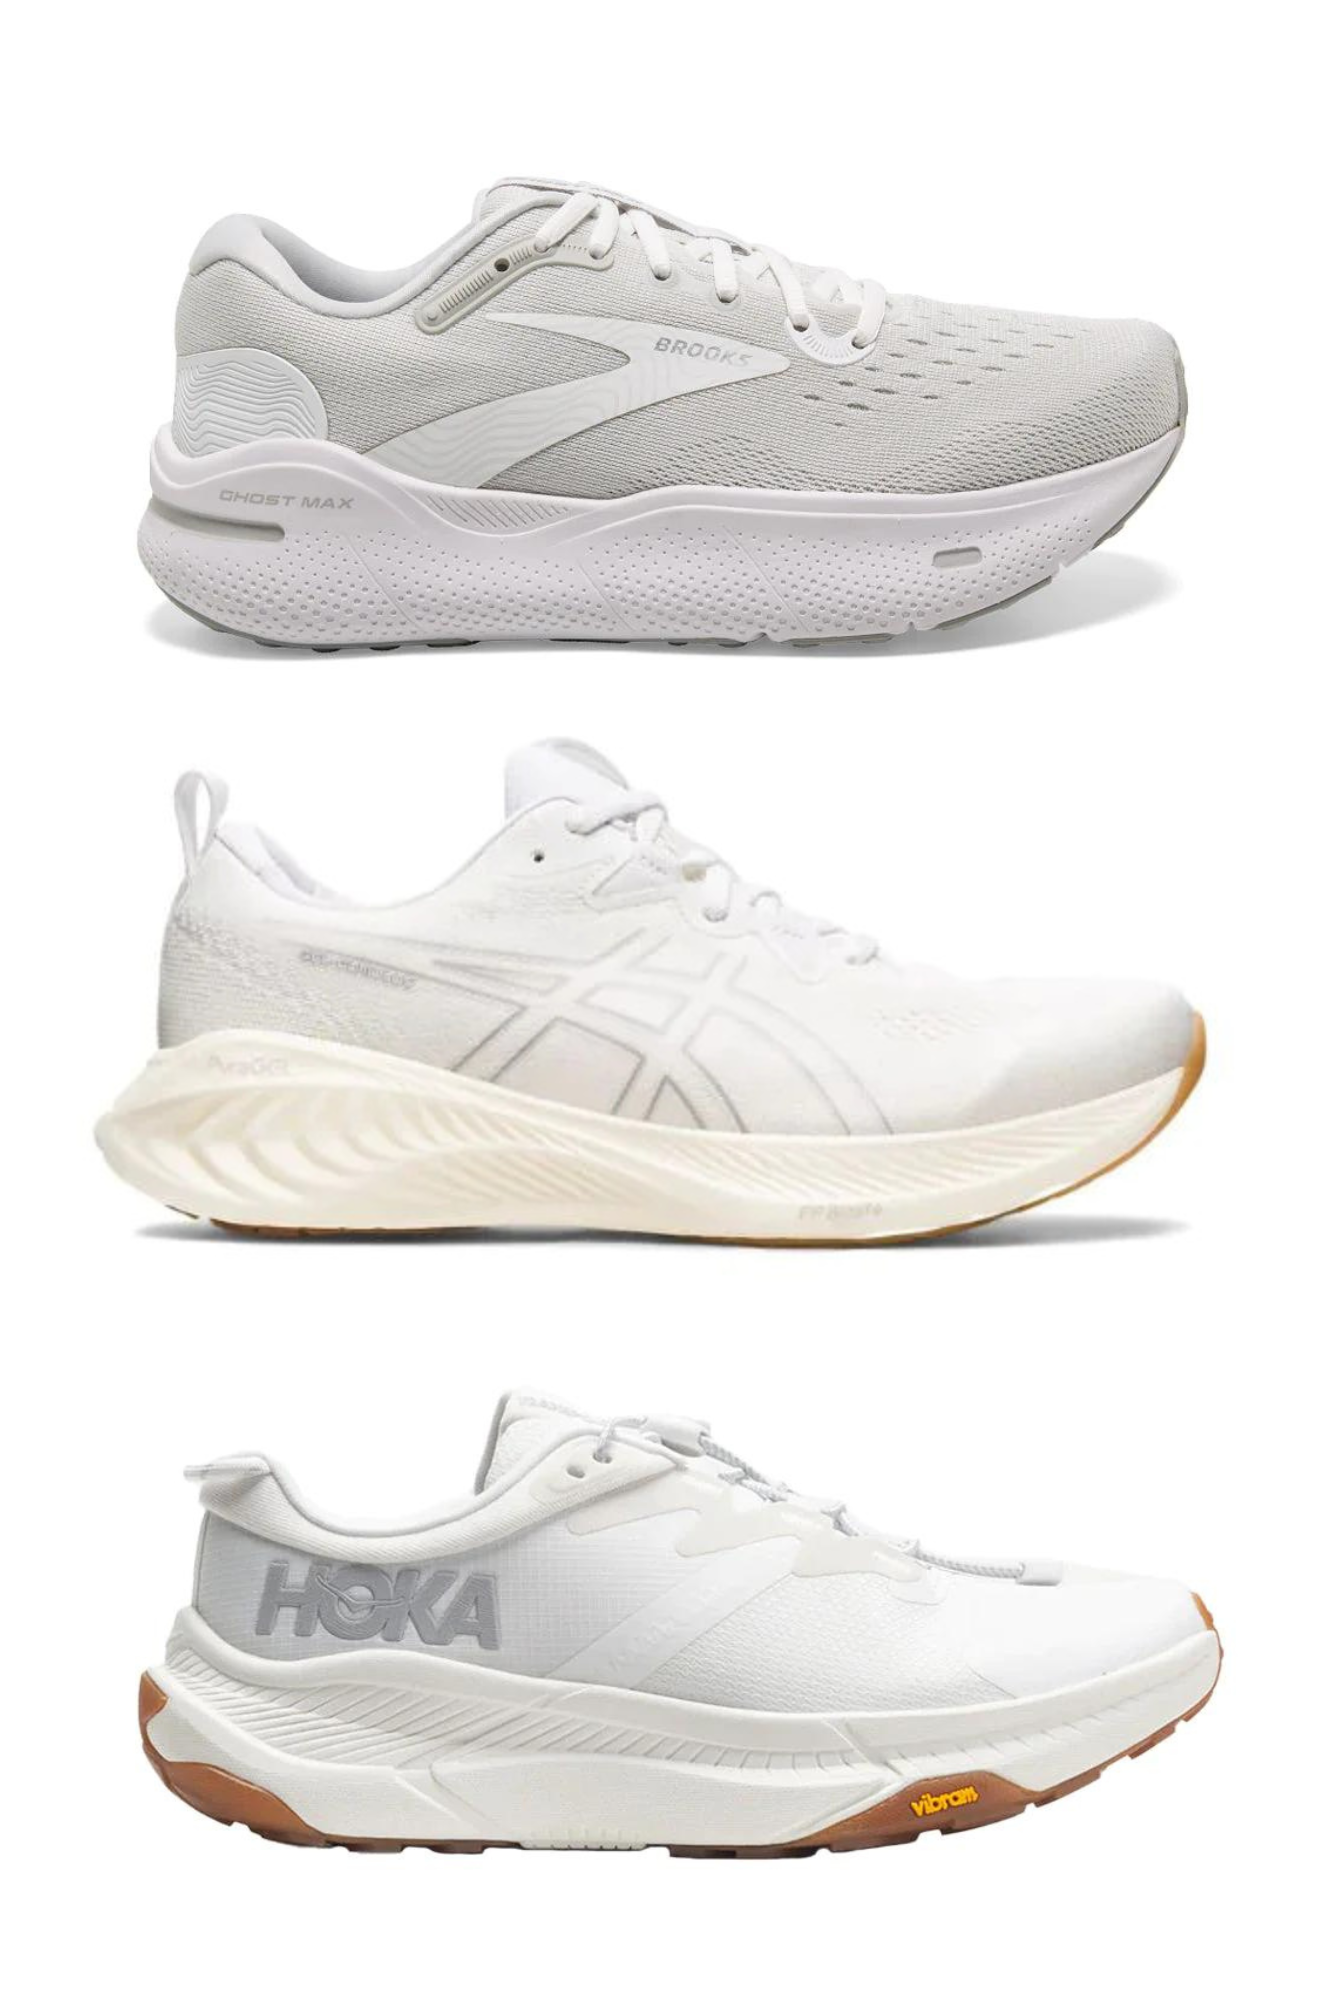 All-White Running Shoes for Men & Women - Our Top Picks for Style